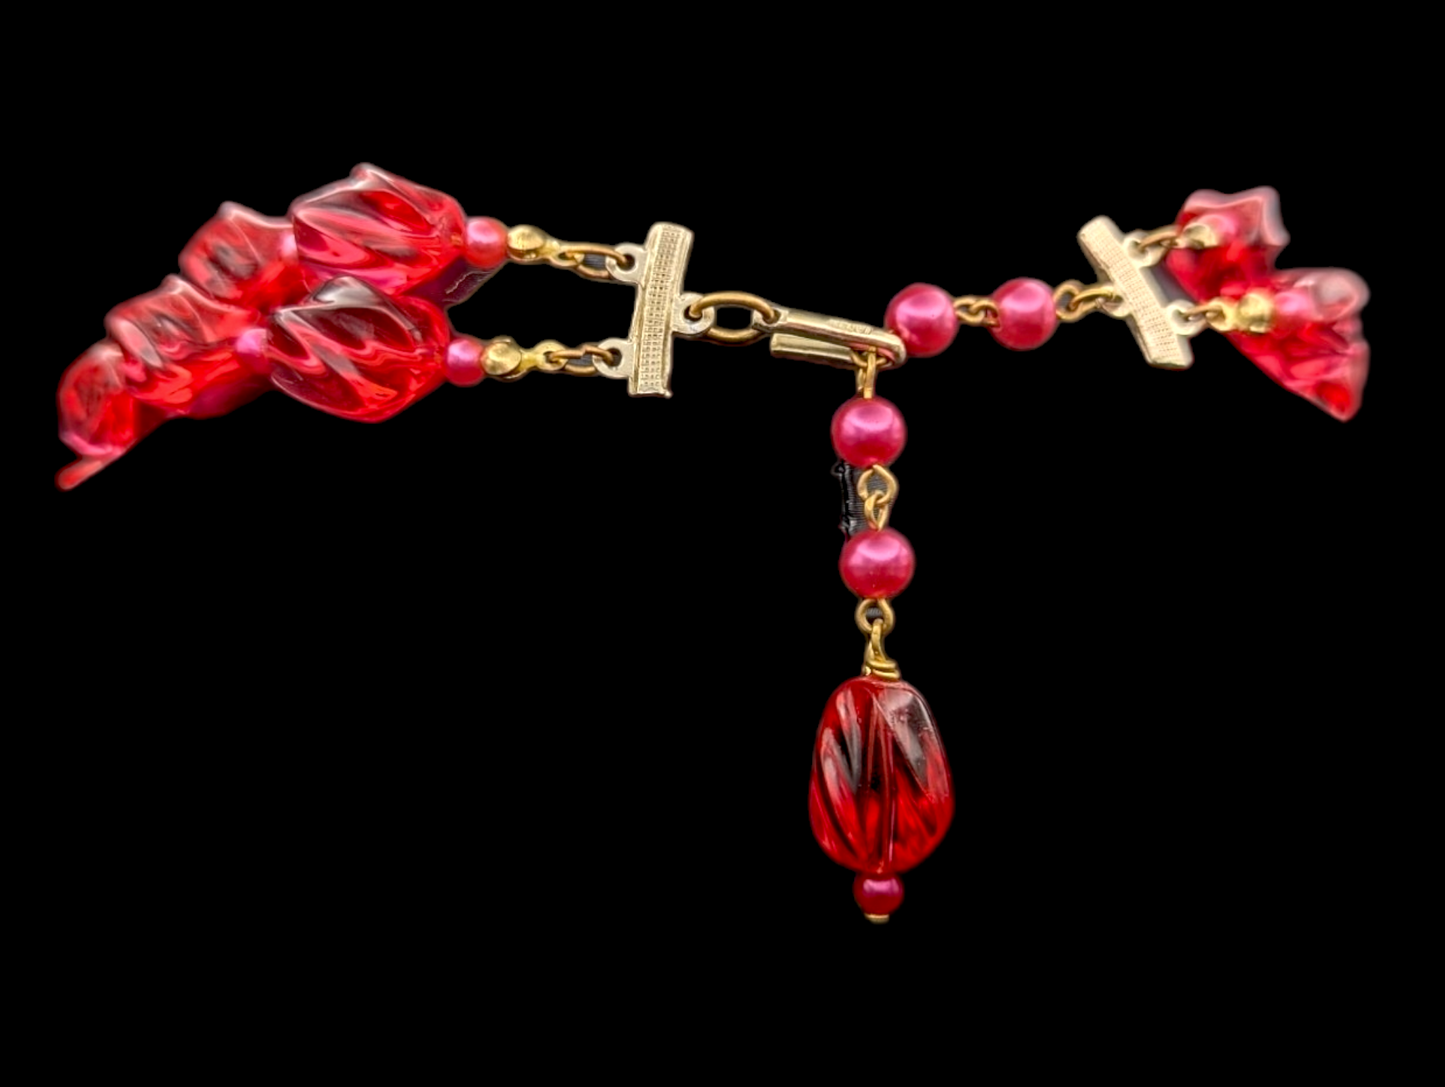 1950s Red Jelly 2 Strand Necklace with Pink Beads and Hook Clasp